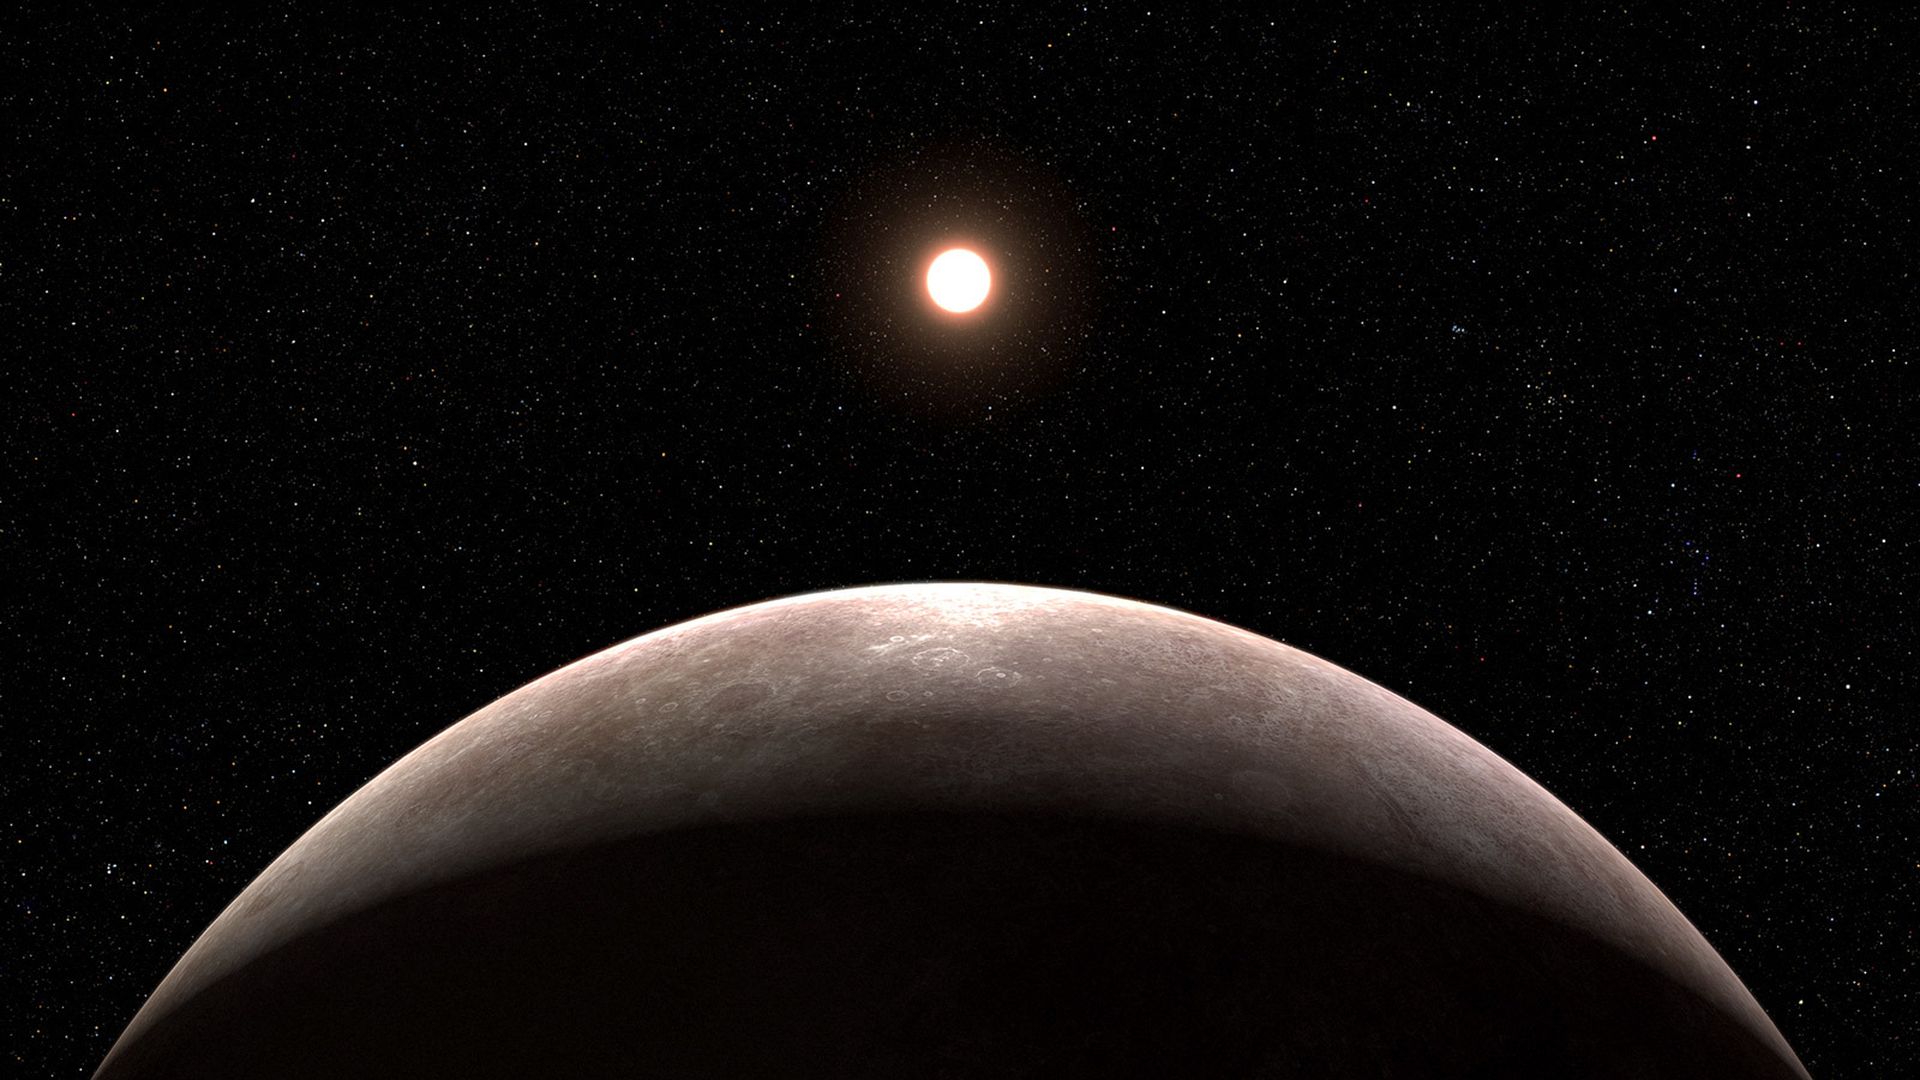 Artist's illustration of a planet rising with its bright, red star in the background